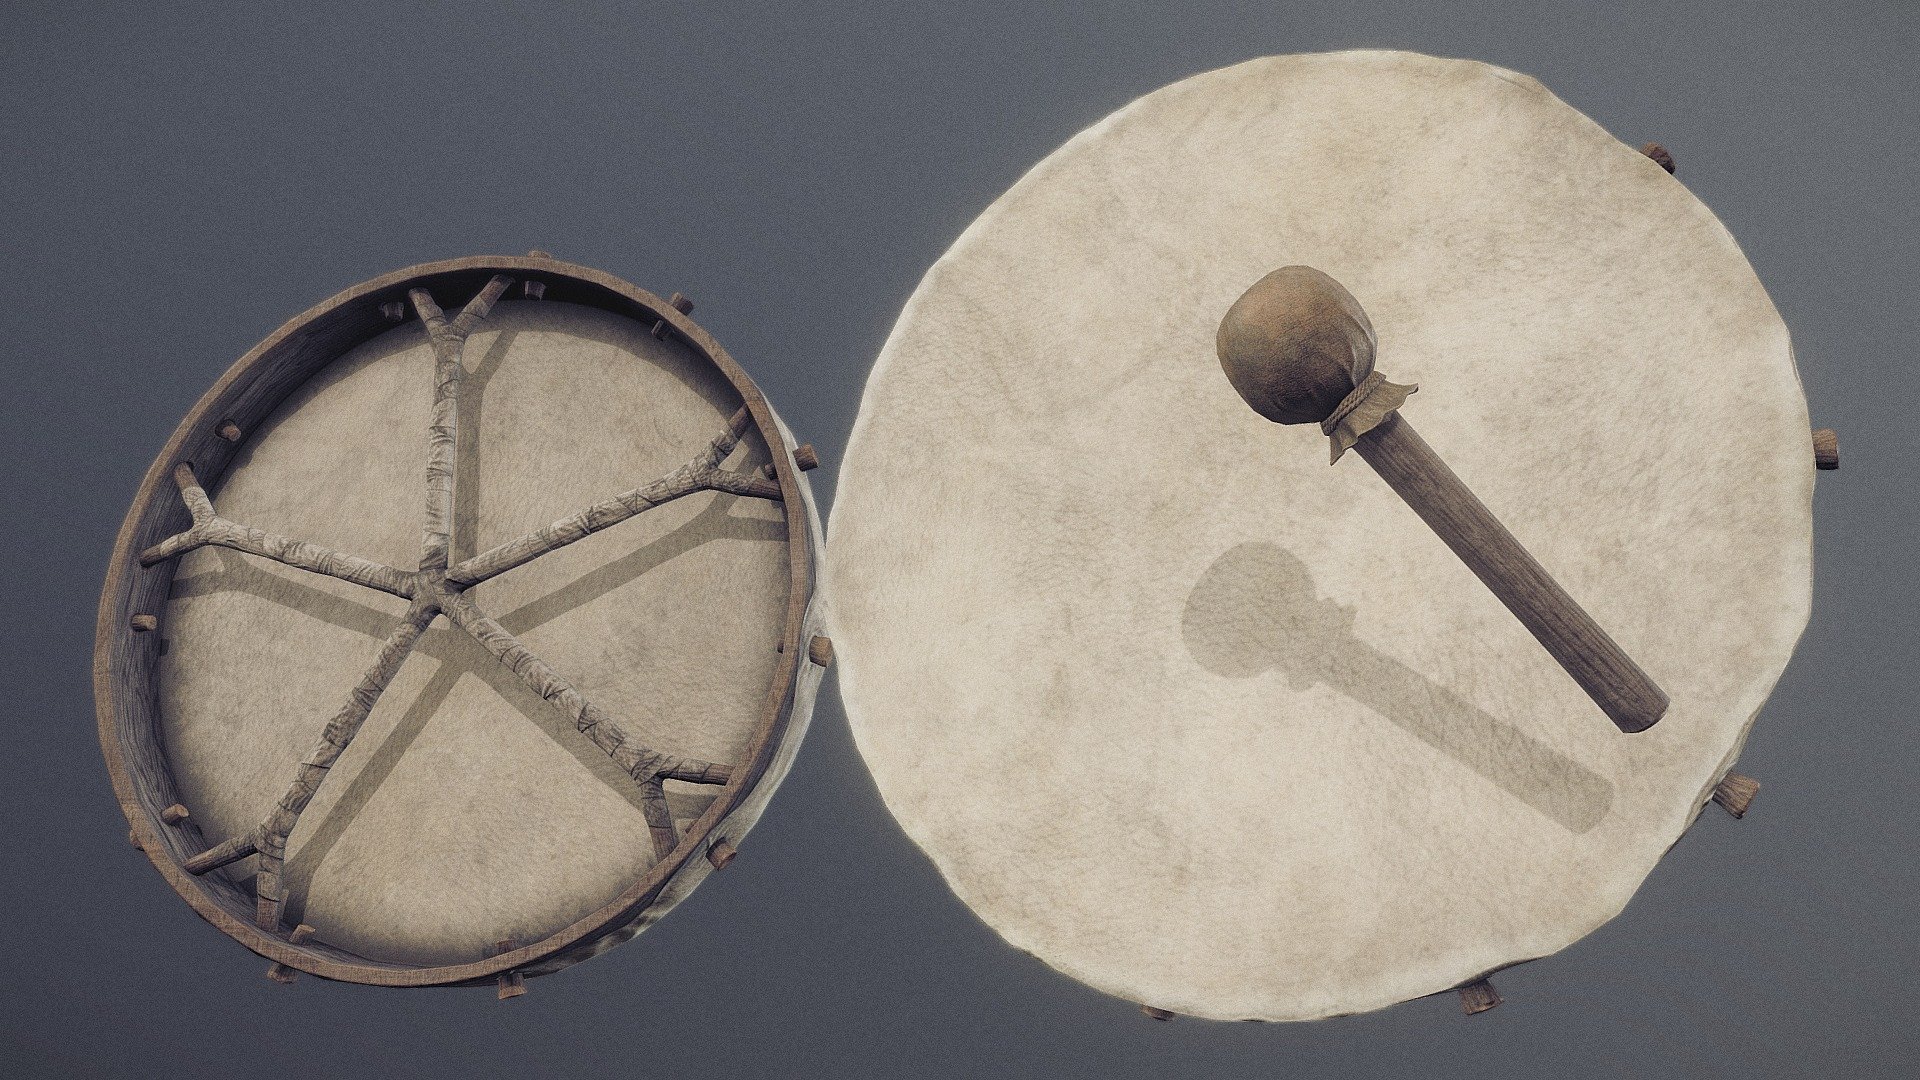 Nordic Shaman Drum

Detailed Gameready Low Poly model of an Nordic Shaman Drum and Drum Stick, with High-Quality PBR Texturing.

Fits perfect for any Viking/Medieval PBR game as Decoration, etc

The Mesh is unwrapped, and PBR Painted.

Standard Textures Base Color, Metallic, Roughness, Height, AO, Normal, Maps

Unreal 4 Textures Base Color, Normal, OcclusionRoughnessMetallic

Unity 5/2017 Textures Albedo, SpecularSmoothness, Normal, and AO Maps

1 x 4096x4096 TGA Textures applied (Drum Base) 1 x 2048x2048 TGA Textures applied (Drum Stick)

Please Note, this PBR Textures Only.

Low Poly Triangles

10692 Tris 5419 Verts

File Formats :

.Max2016 .Max2015 .Max2014 .Max2013 .FBX .OBJ .3DS .DAE

If you like the music you can hear the music and all of Heldom’s other tracks on Spotify : https://open.spotify.com/artist/0xdoa2u0W7fR3GUqkZIUxD?si=09ryVdizSDGY7umi7SDinA - Nordic Shaman Drum - PBR - Buy Royalty Free 3D model by GamePoly (@triix3d) 3d model